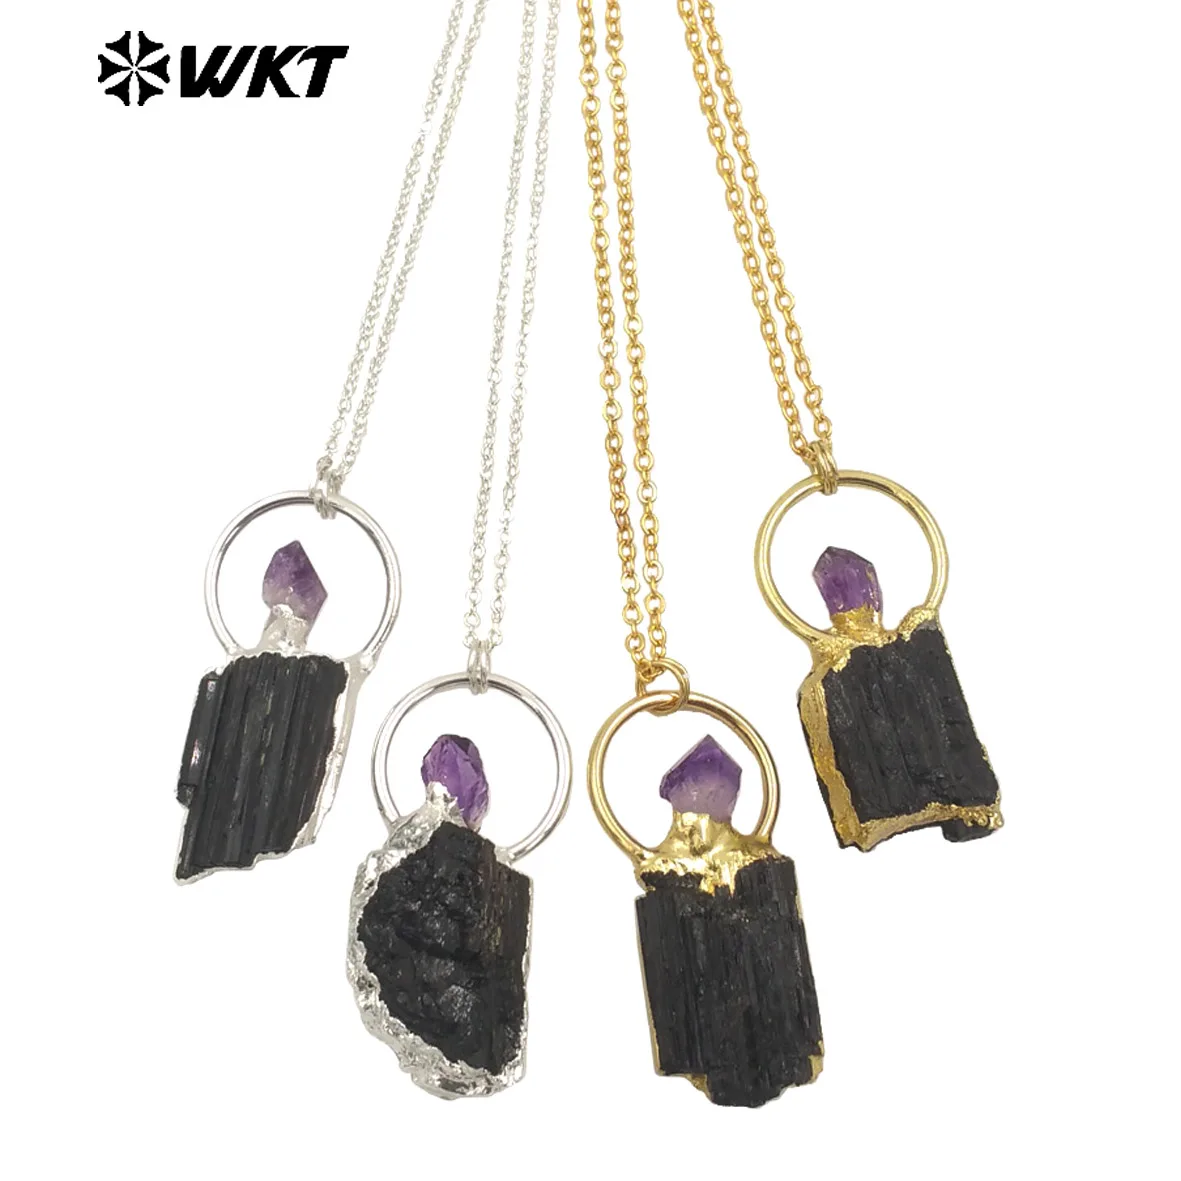 

WT-N1467 WKT 2023 Retro Style Women Pendant Black Tourmaline Necklace 18k Gold Plated Accessory Party Jewelry Popular